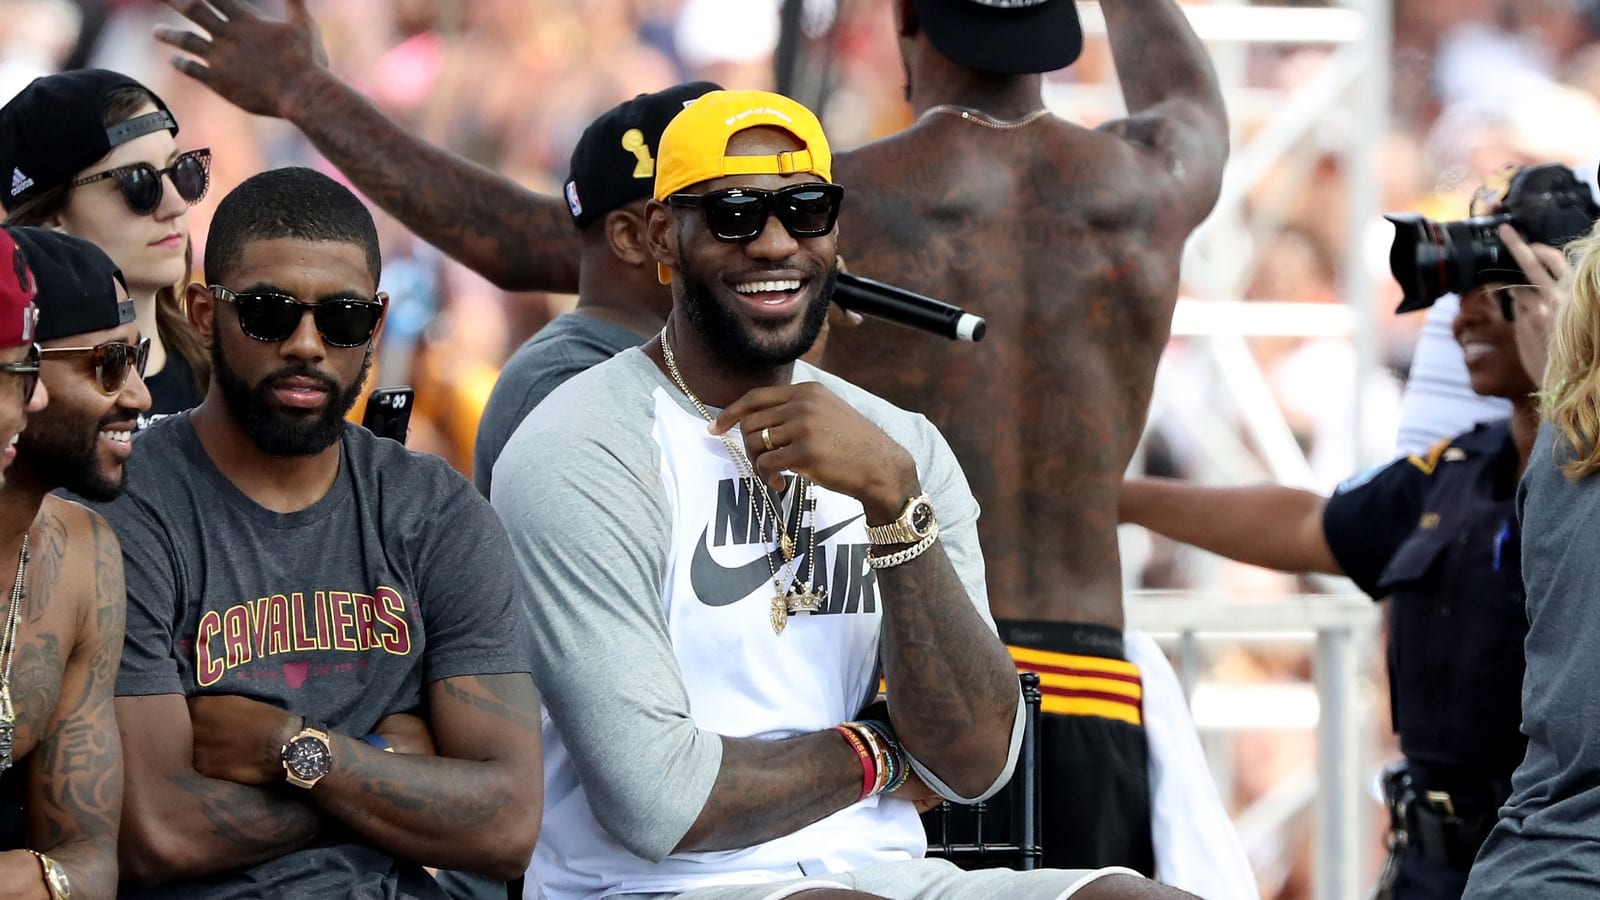 Report: LeBron James urged Justin Bieber not to perform at RNC